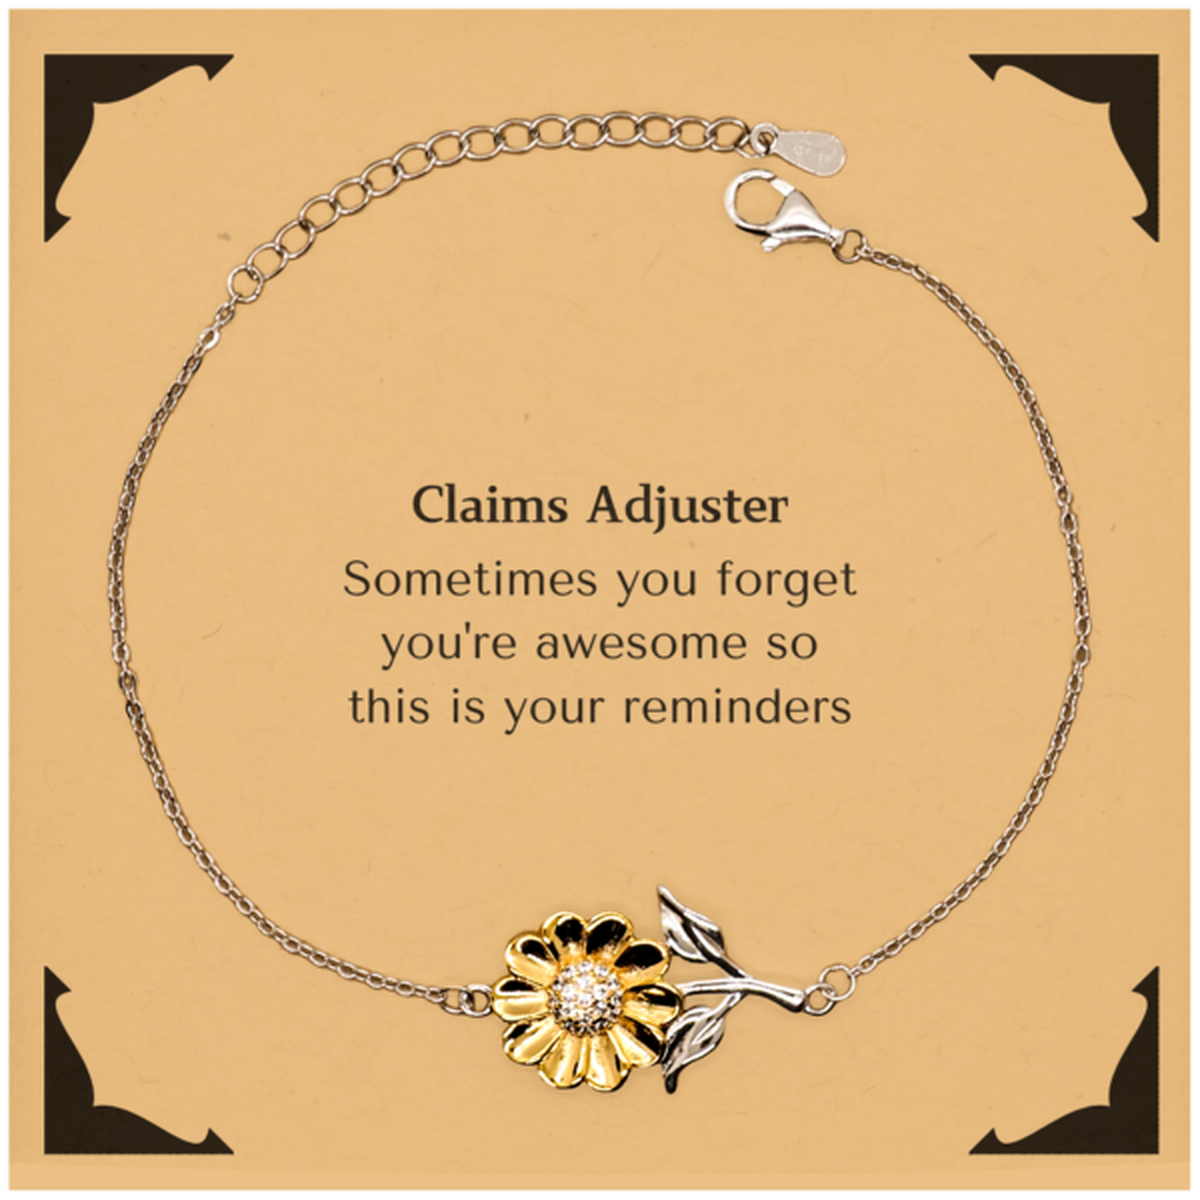 Sentimental Claims Adjuster Sunflower Bracelet, Claims Adjuster Sometimes you forget you're awesome so this is your reminders, Graduation Christmas Birthday Gifts for Claims Adjuster, Men, Women, Coworkers